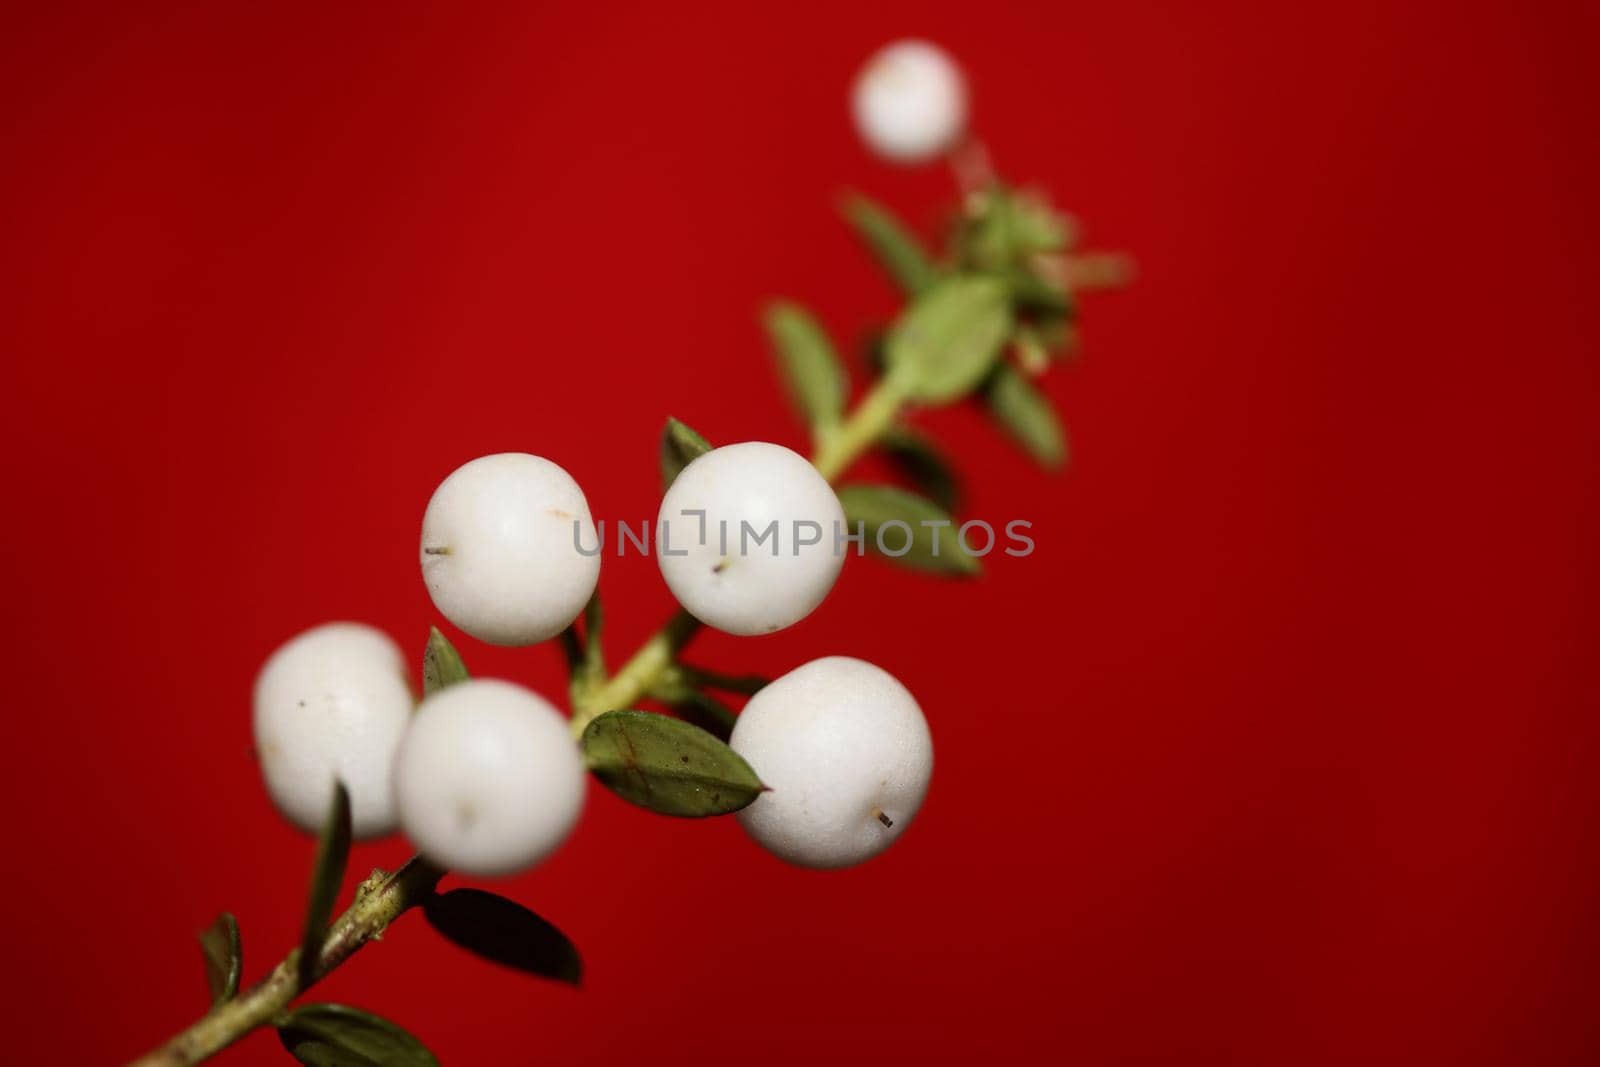 White round Gaultheria fruits close up botanical background family ericaceae high quality big size prints home decor shop wall poster by BakalaeroZz